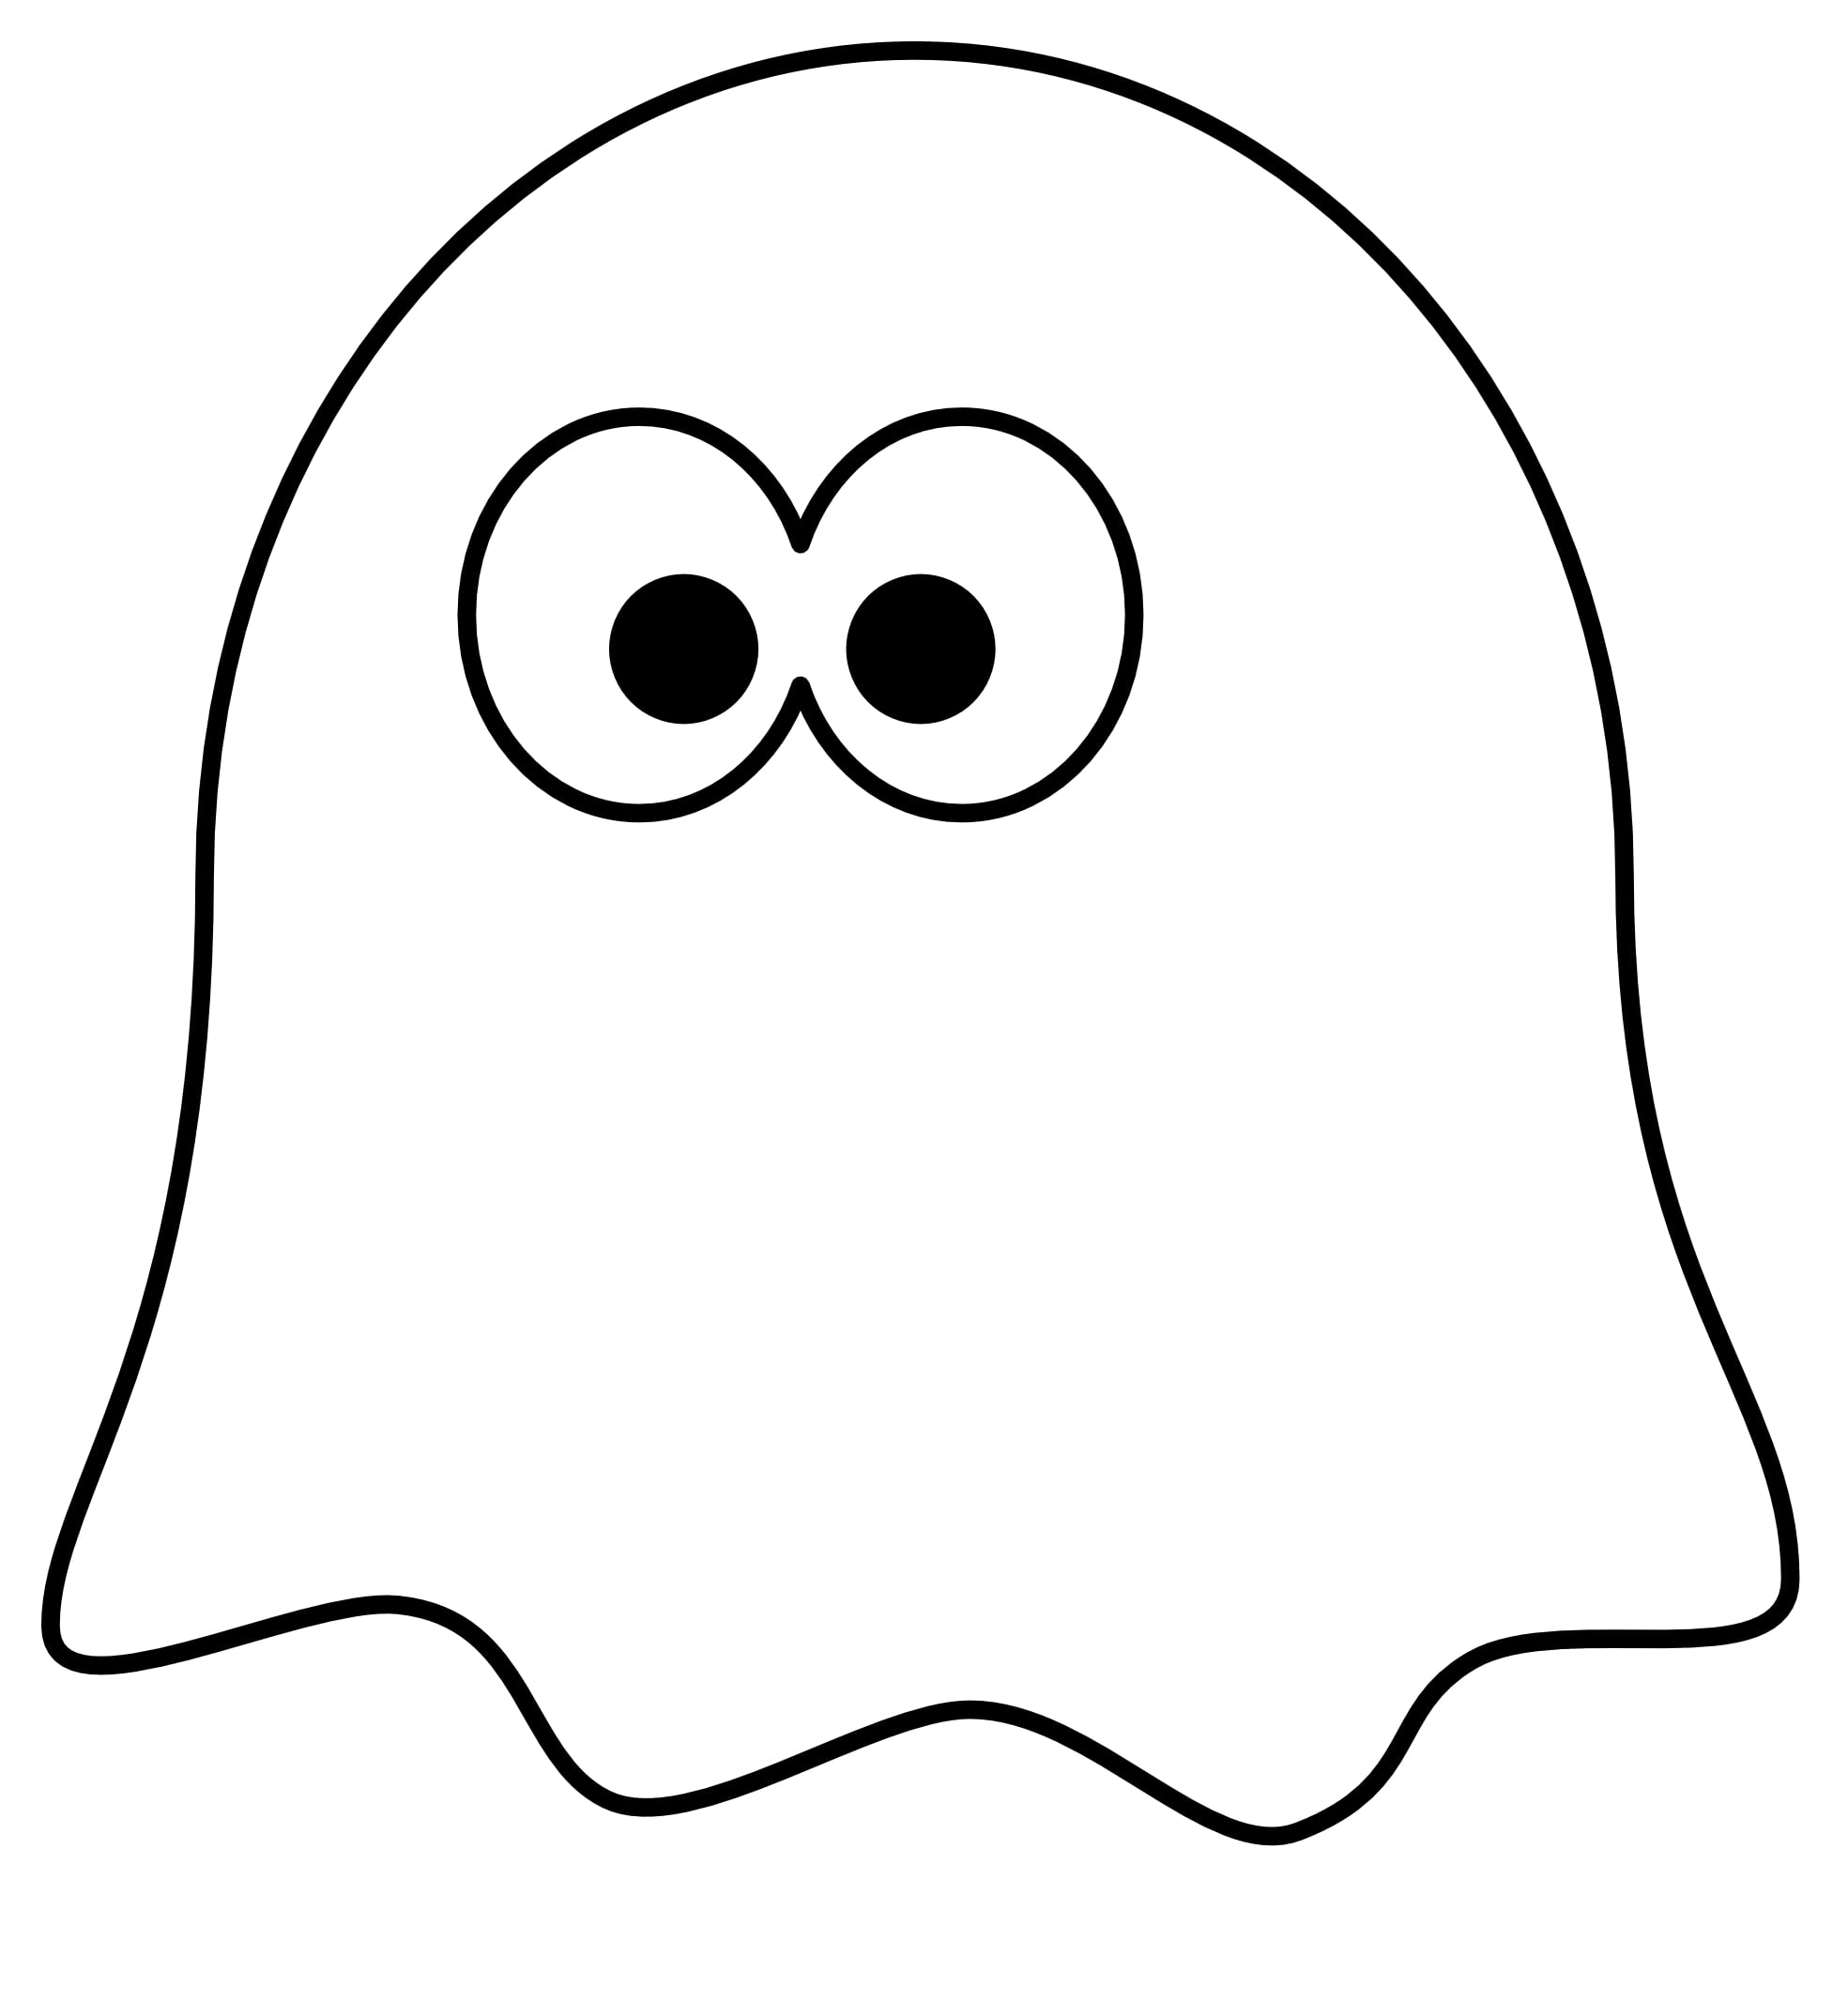 free black and white ghost clipart - photo #31